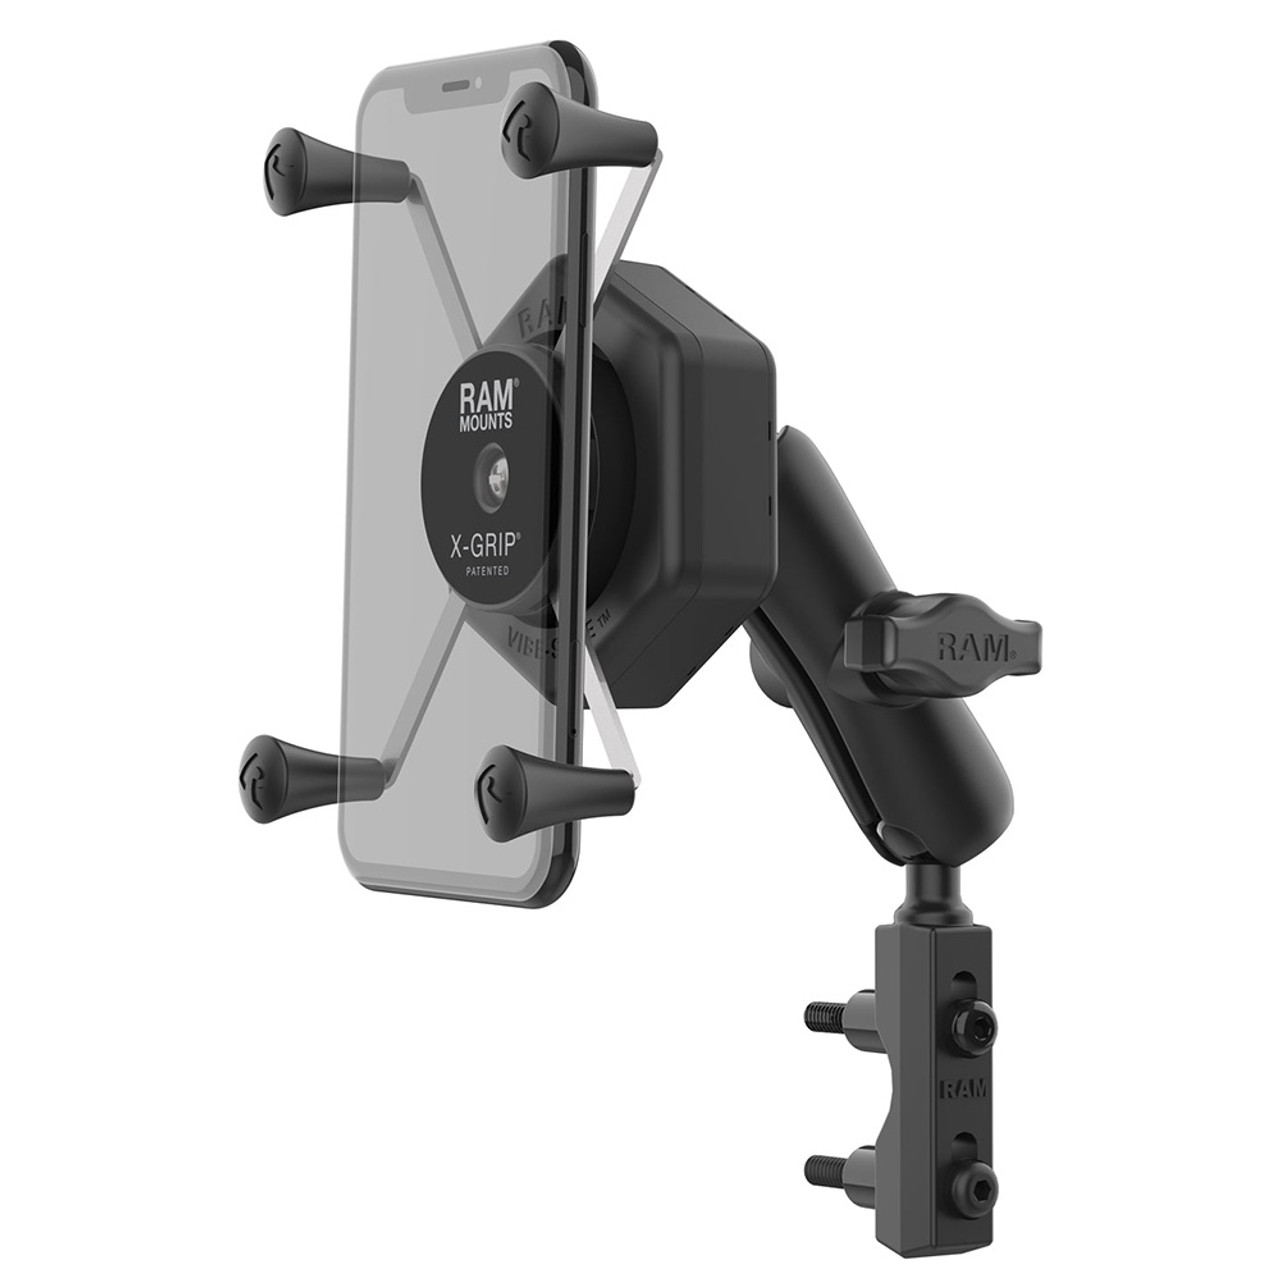 RAM Mounts X-Grip® High-Strength Composite Phone Mount with Drill-Down Base